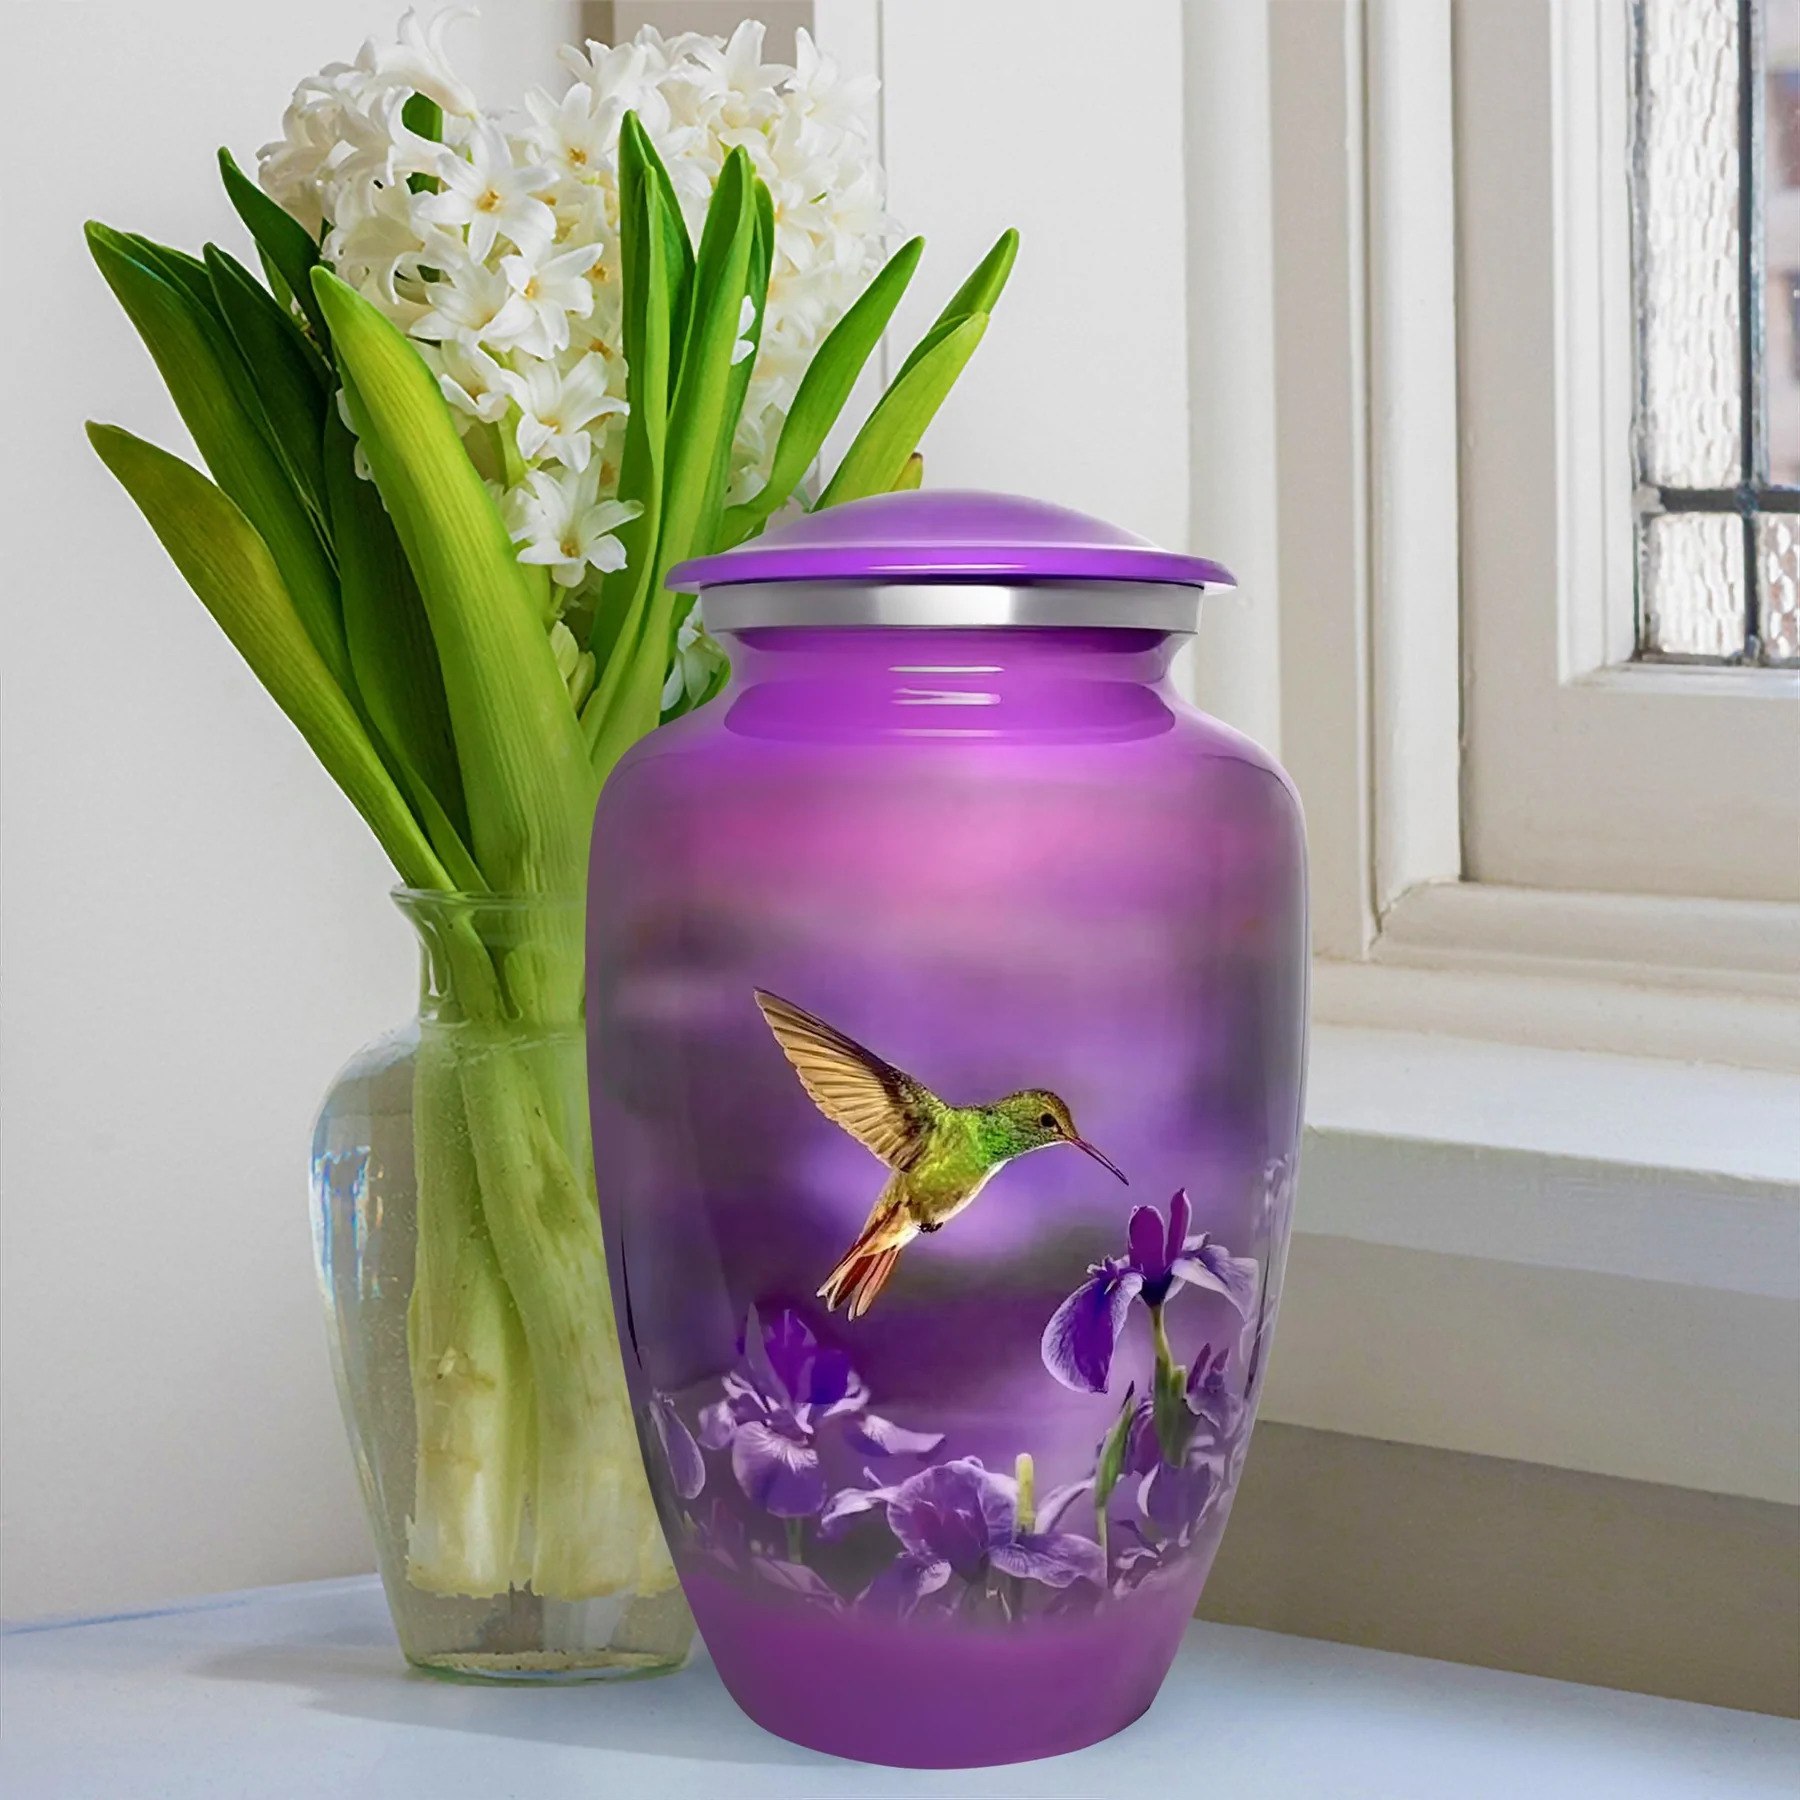 A purple urn depicting a hummingbird on a window sill in front of a vase with flowers